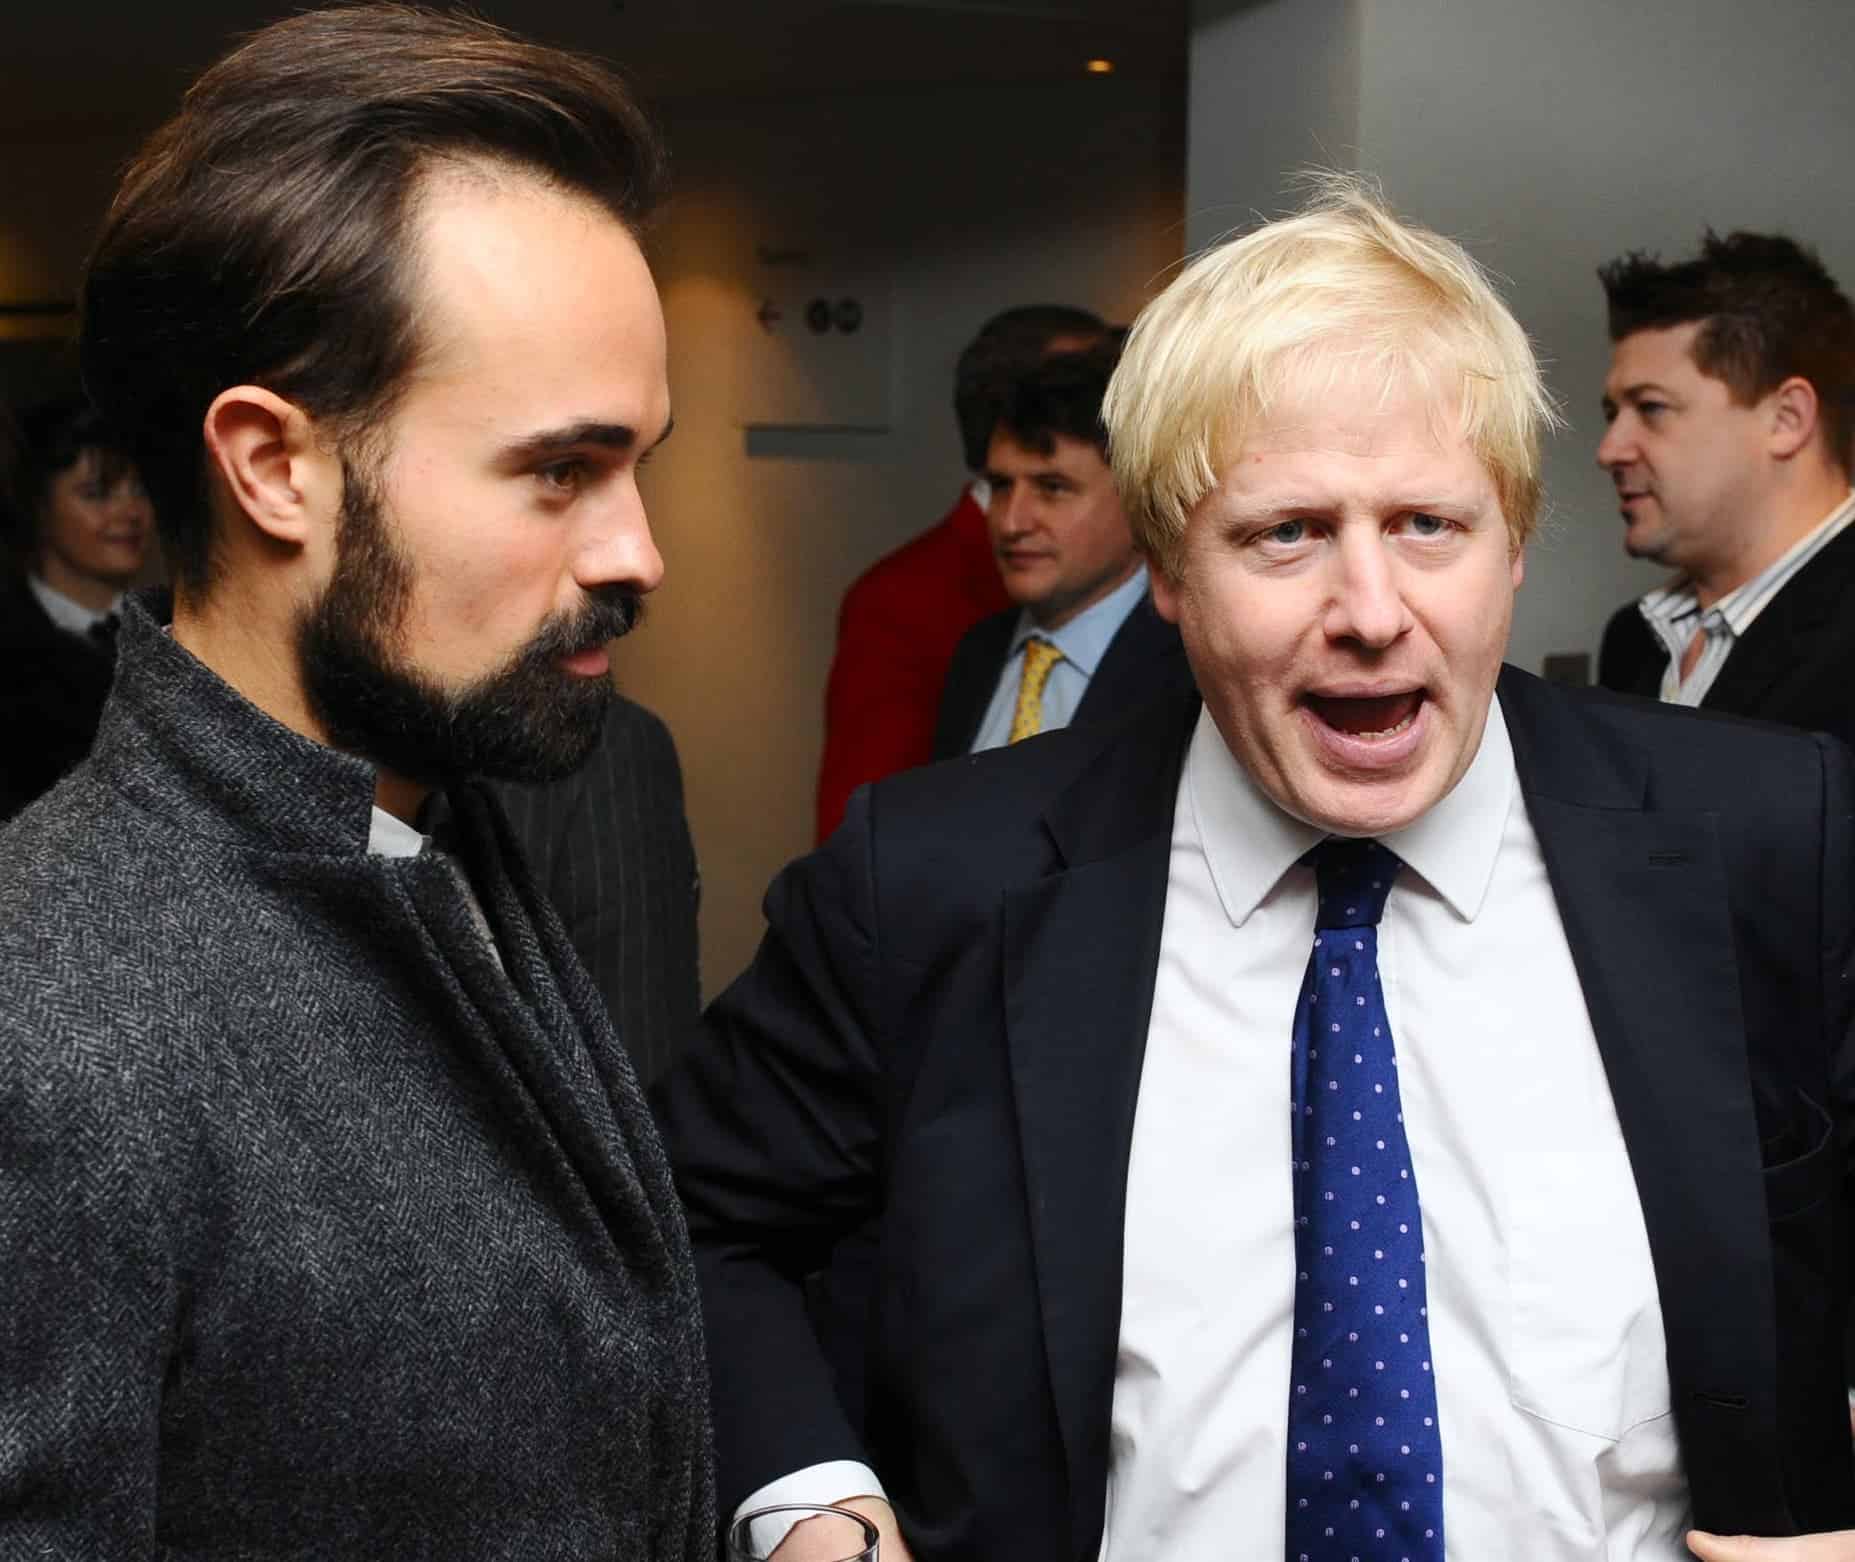 Boris Johnson and the Lebedevs article sparks debate about UK media and democracy